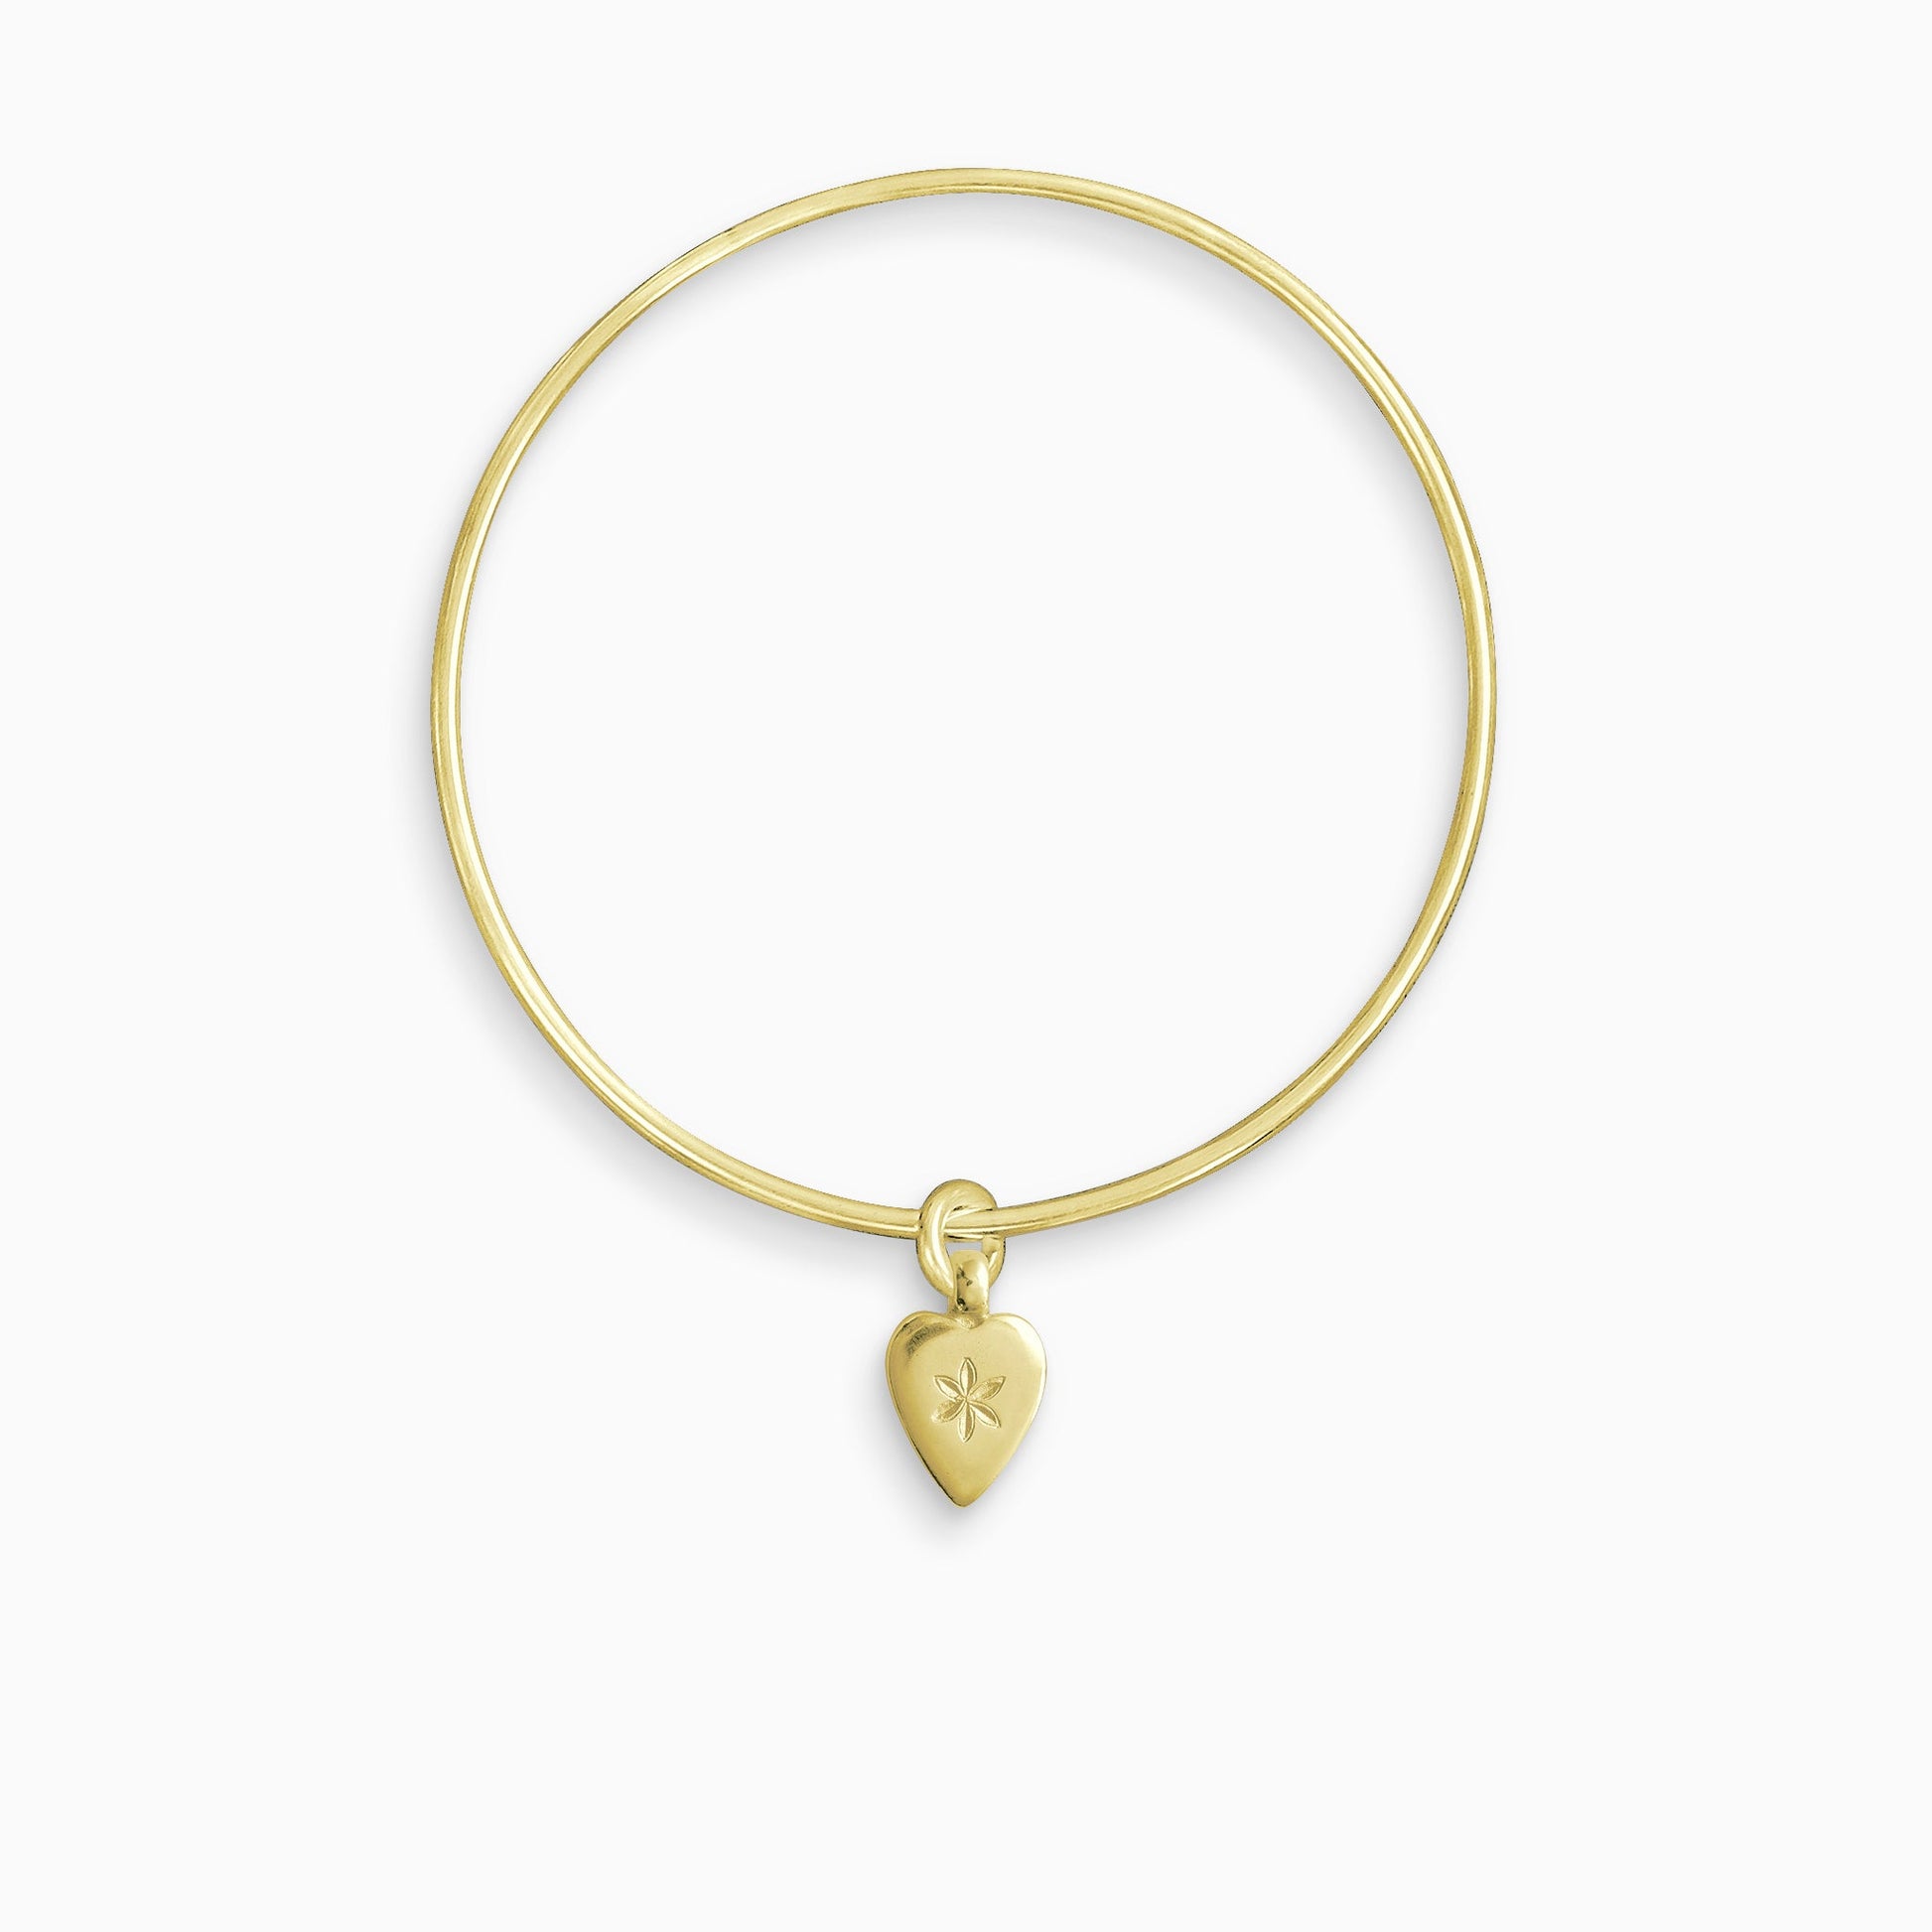 An 18ct Fairtrade yellow gold smooth heart shaped charm engraved with a 6 petal flower, freely moving on a round wire bangle. Charm 15mm x 8mm. Bangle 63mm inside diameter x 2mm round wire.